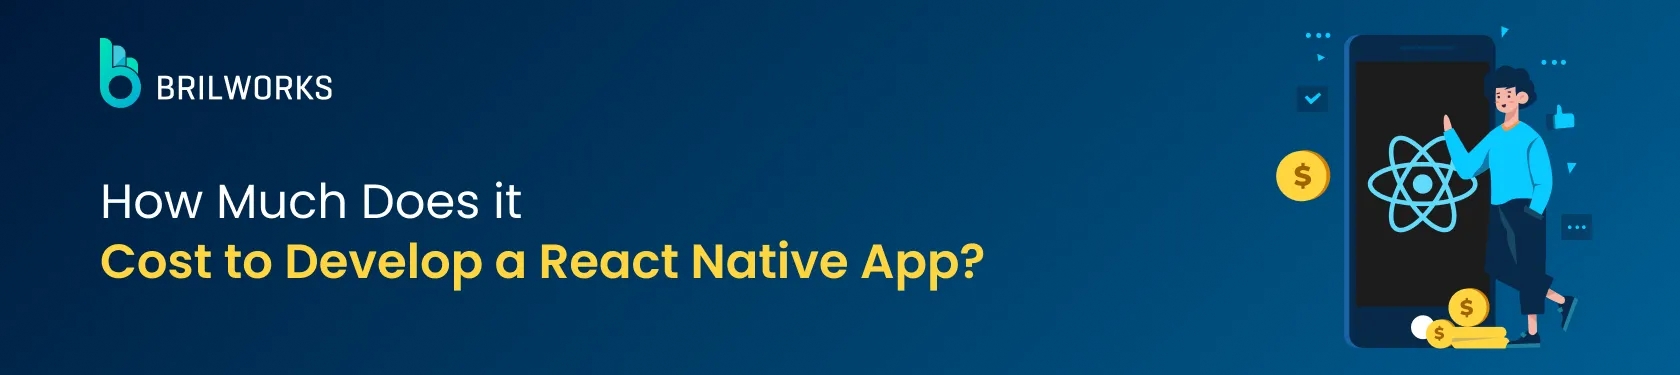 How Much Does it Cost to Develop a React Native App